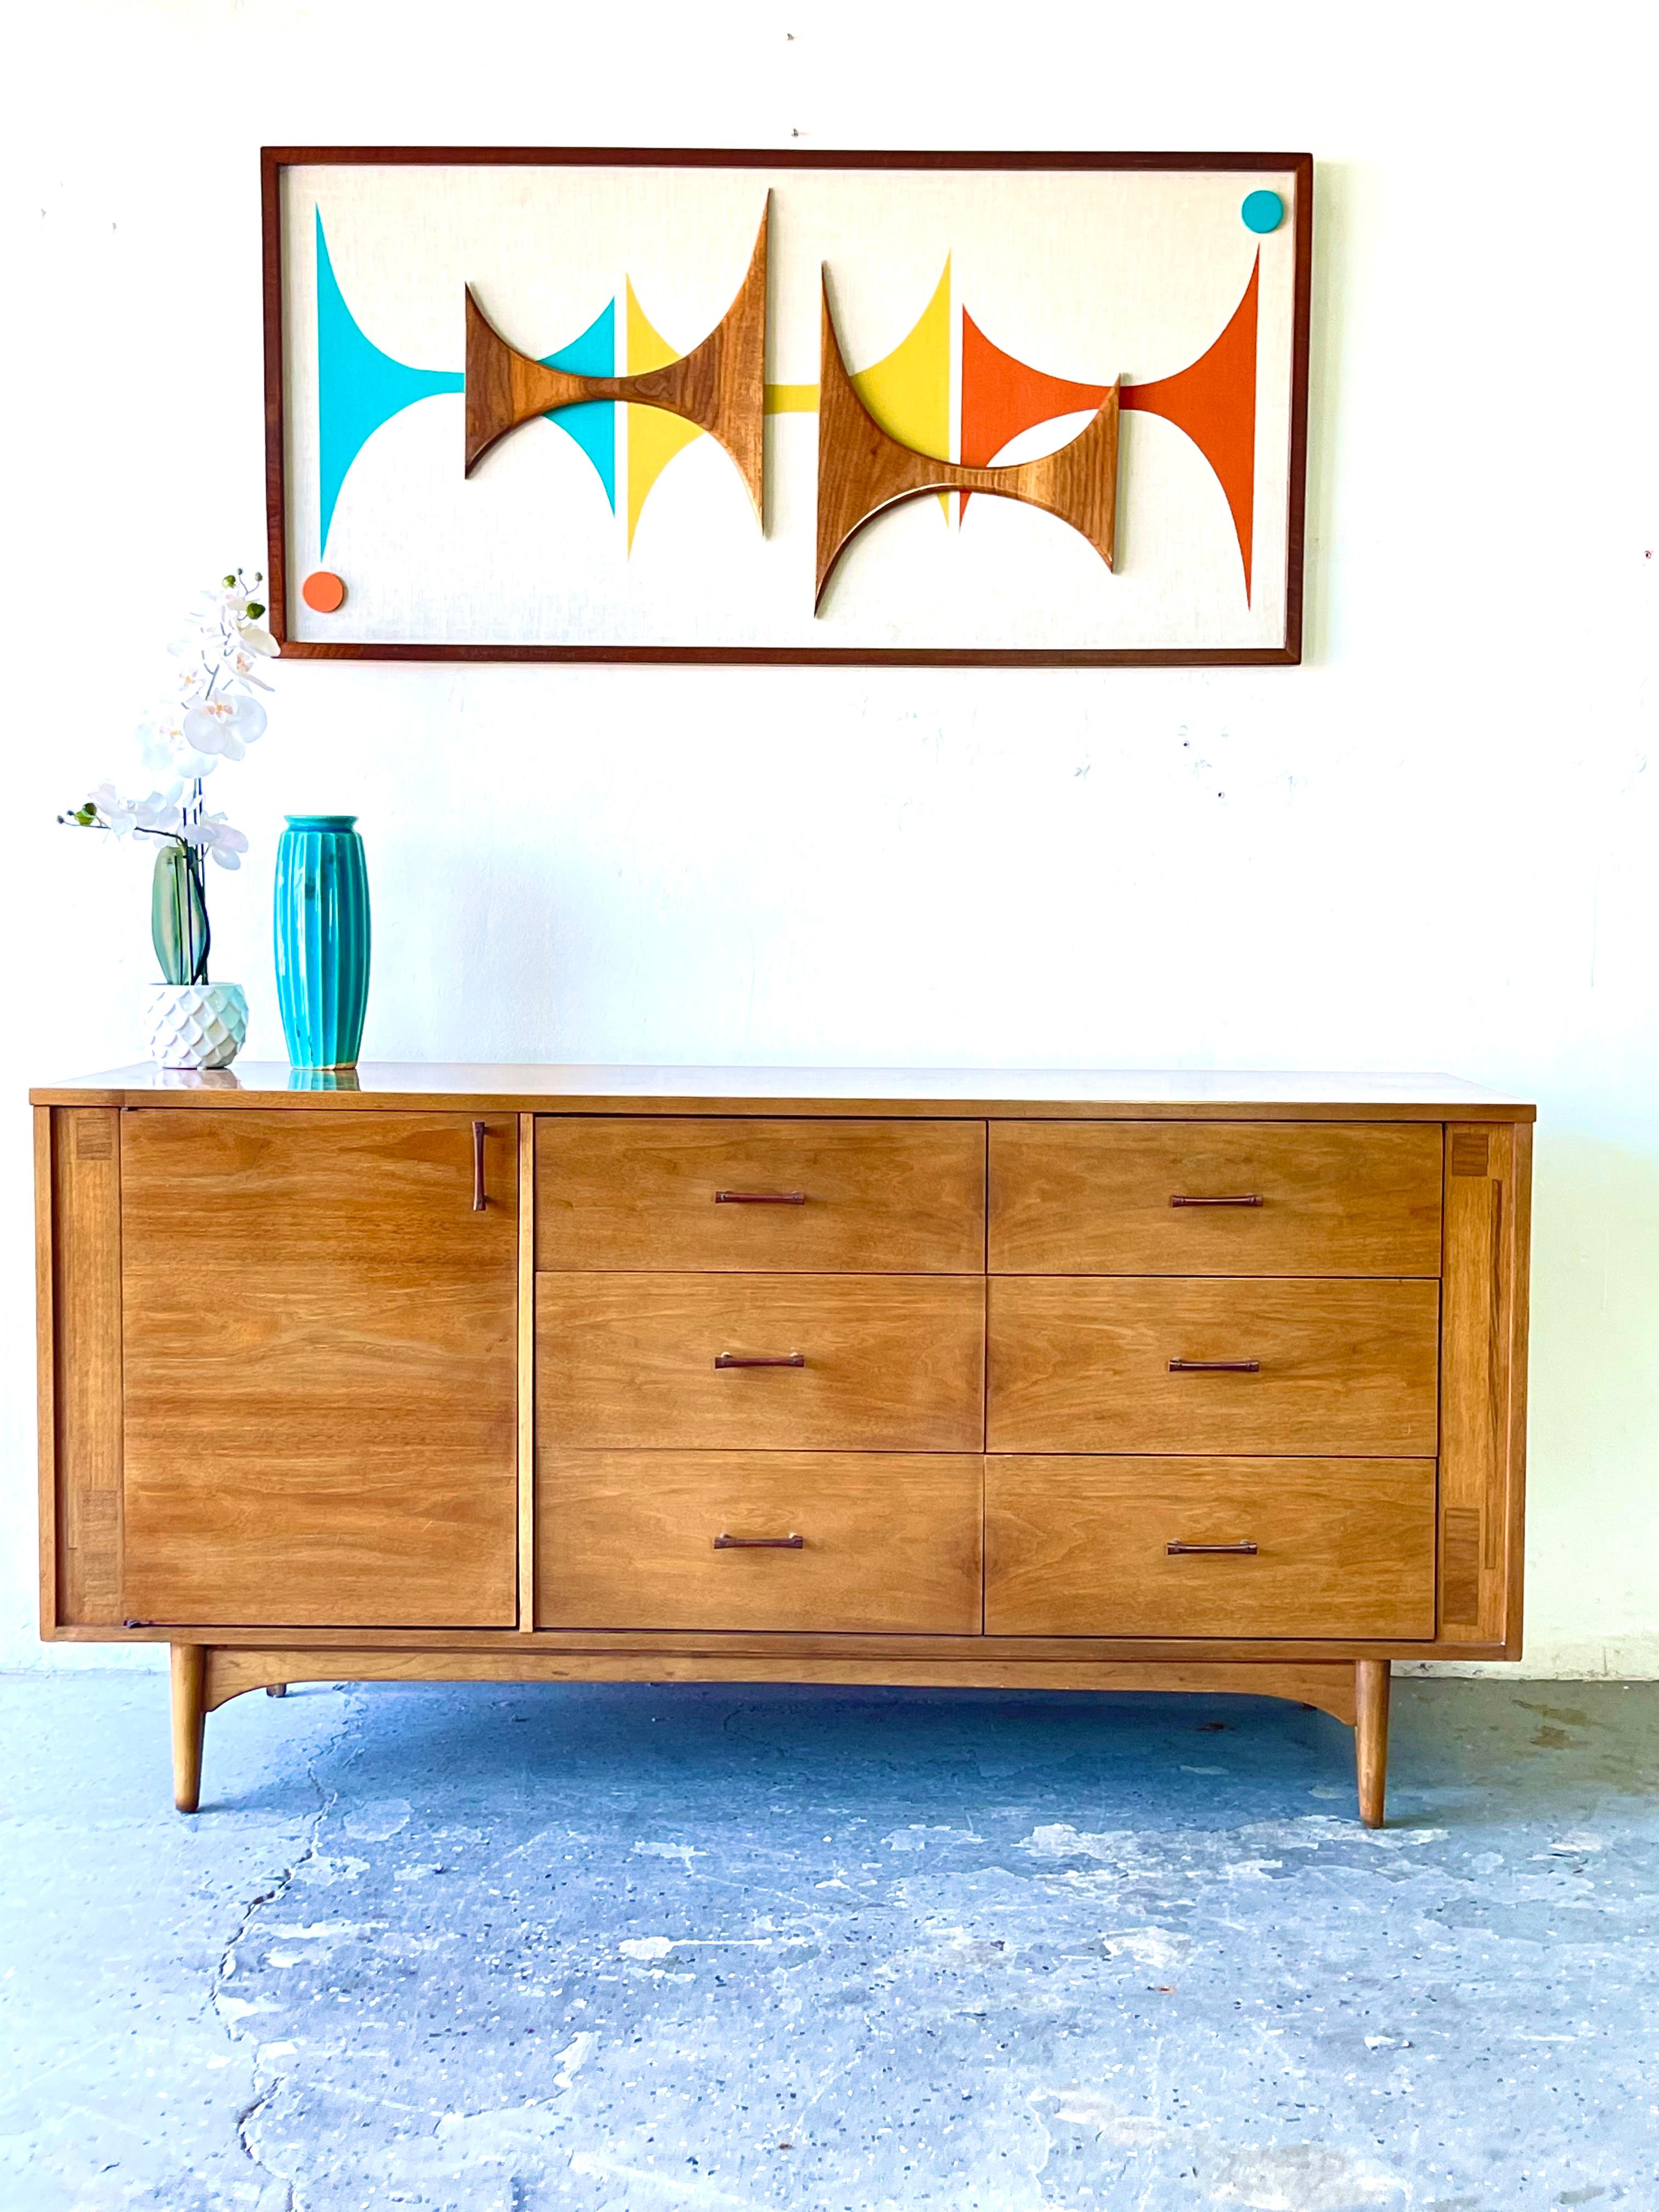 Kroehler Mid-Century Modern walnut 9 drawer Credenza dresser


High quality American Made walnut wood Gentlemen's credenza with Dovetailed drawers with inlaid Rosewood accents and Rosewood handles. 

Very nice vintage condition 

See photos